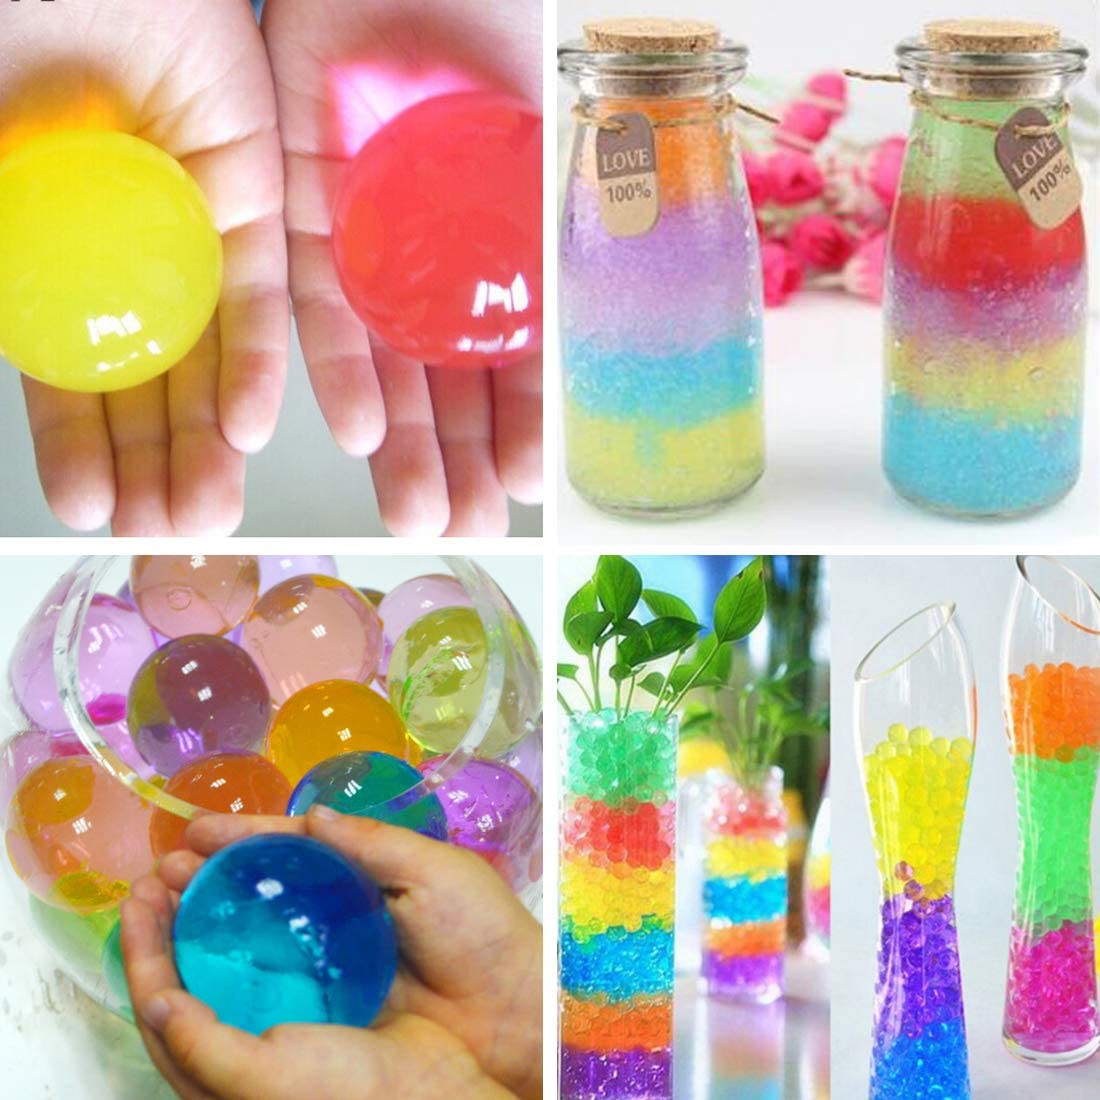 Details about   Large Jumbo Giant Water Seeds Balls Crystal Soil Jelly Gel Beads Home Wedding 